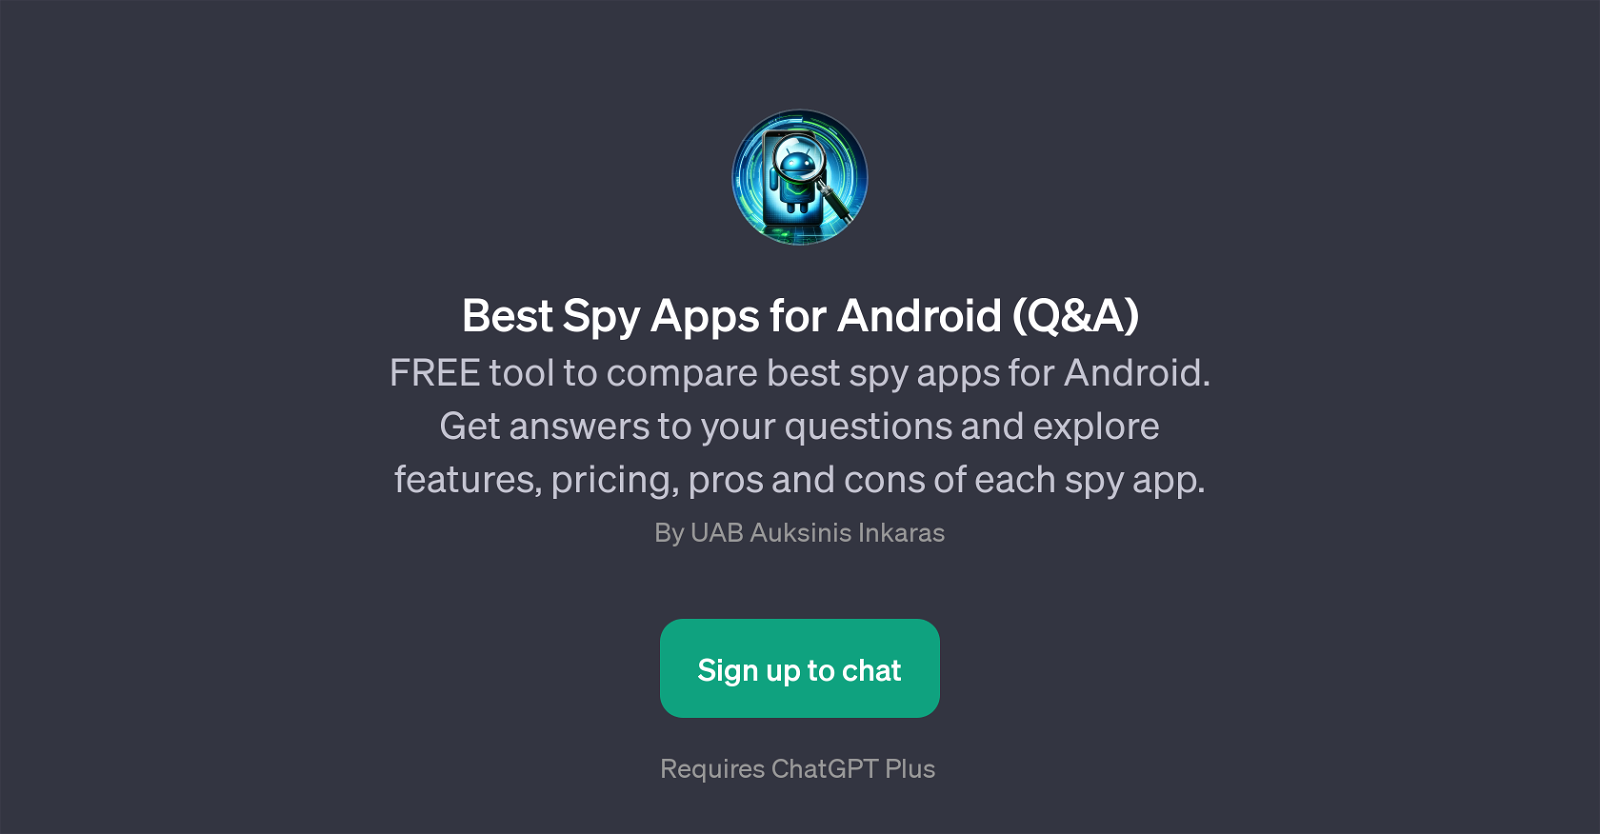 Best Spy Apps for Android (Q&A) website